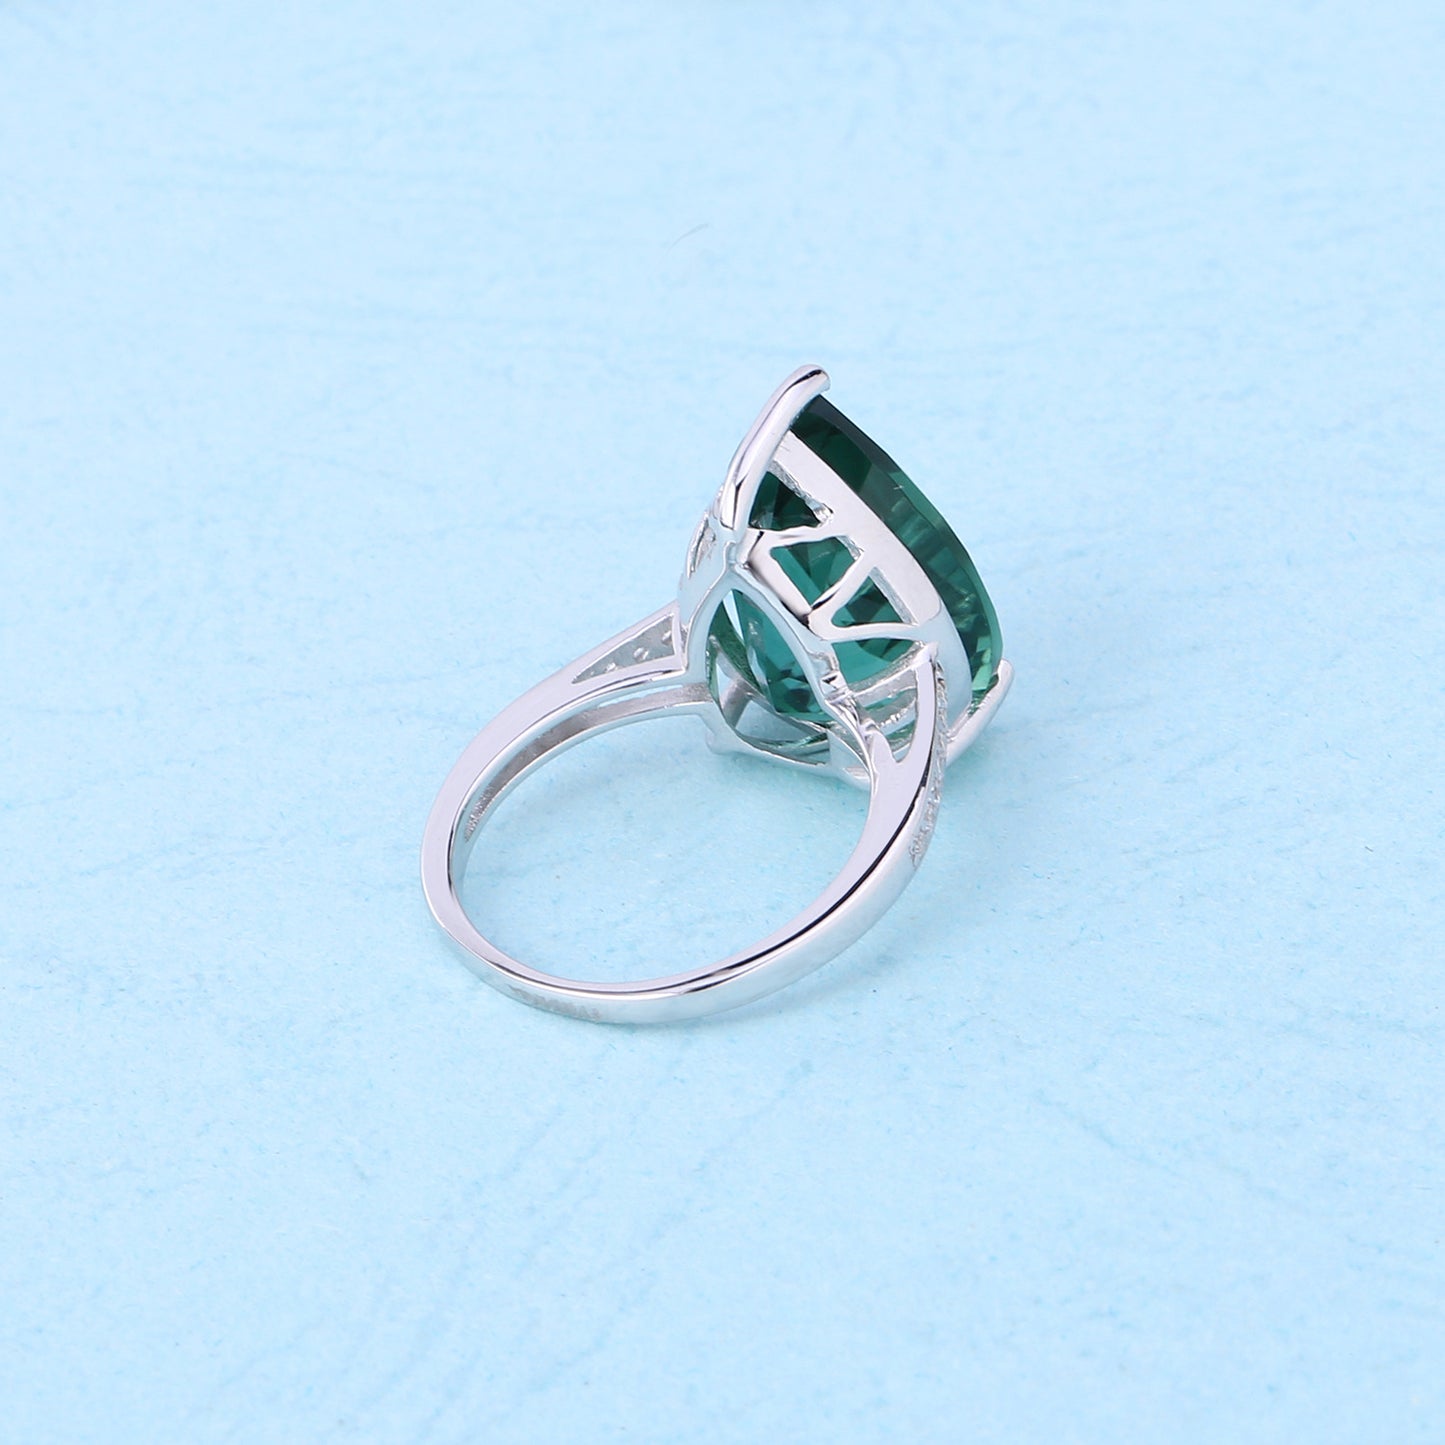 S925 Silver Inlaid Green Crystal Ring for Women